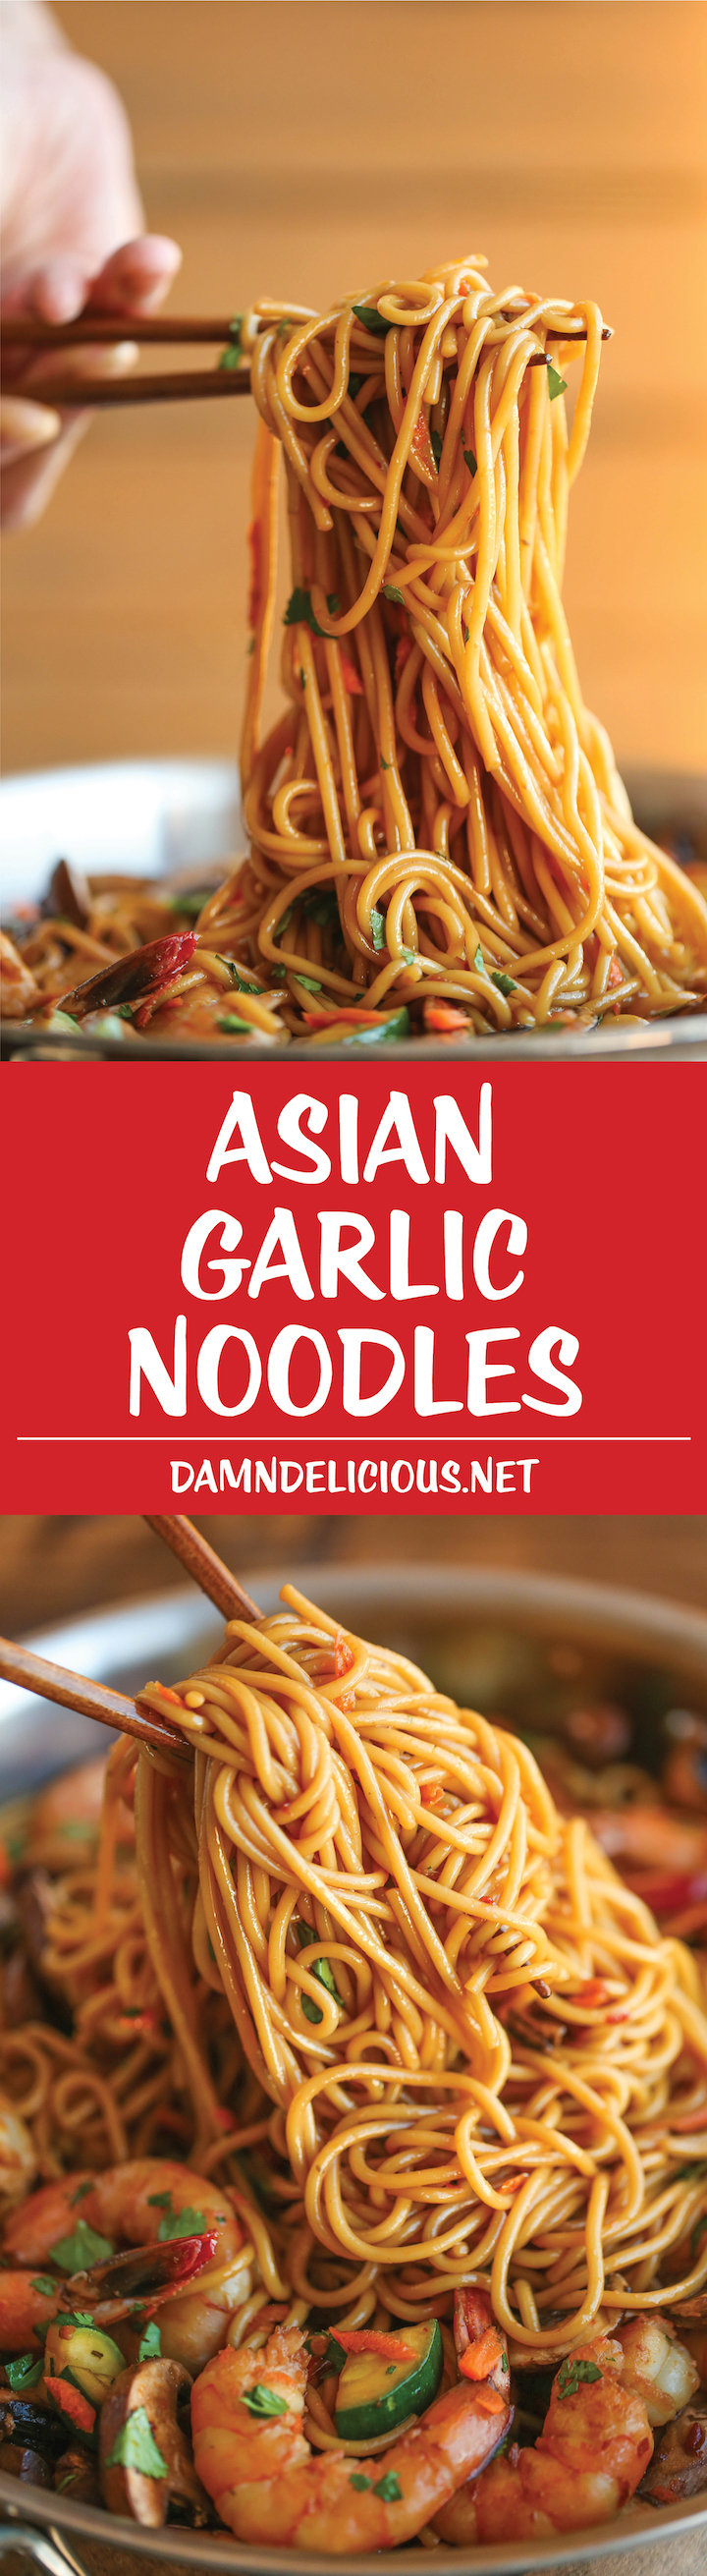 Asian Garlic Noodles - Easy peasy Asian noodle stir-fry using pantry ingredients that you already have on hand. Quick, no-fuss, and made in less than 30min!